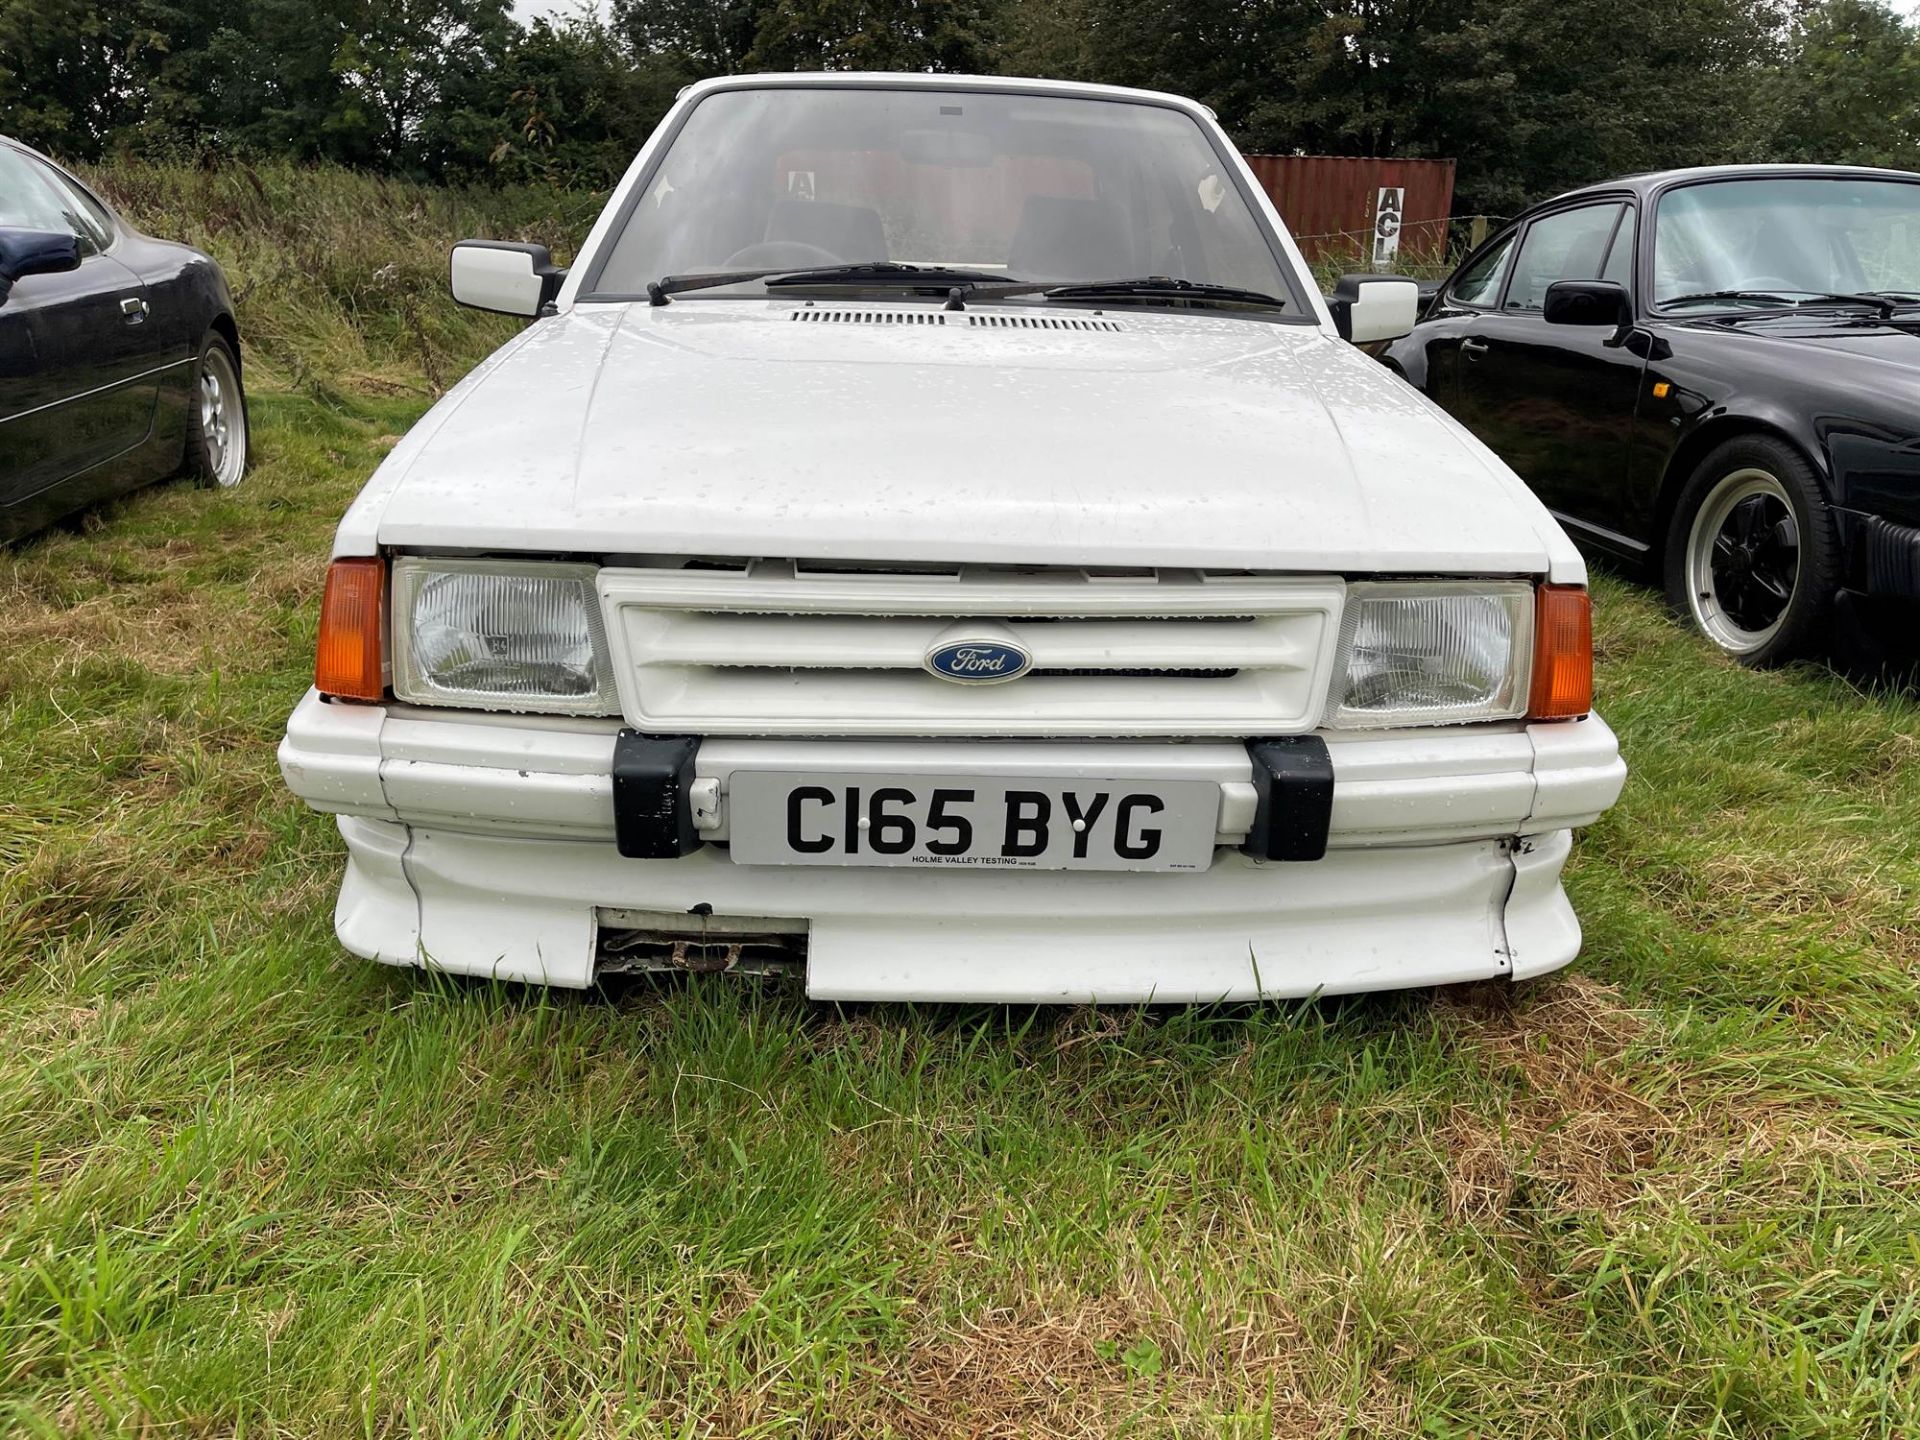 1985 Ford Escort RS Turbo Series 1 - Image 10 of 10